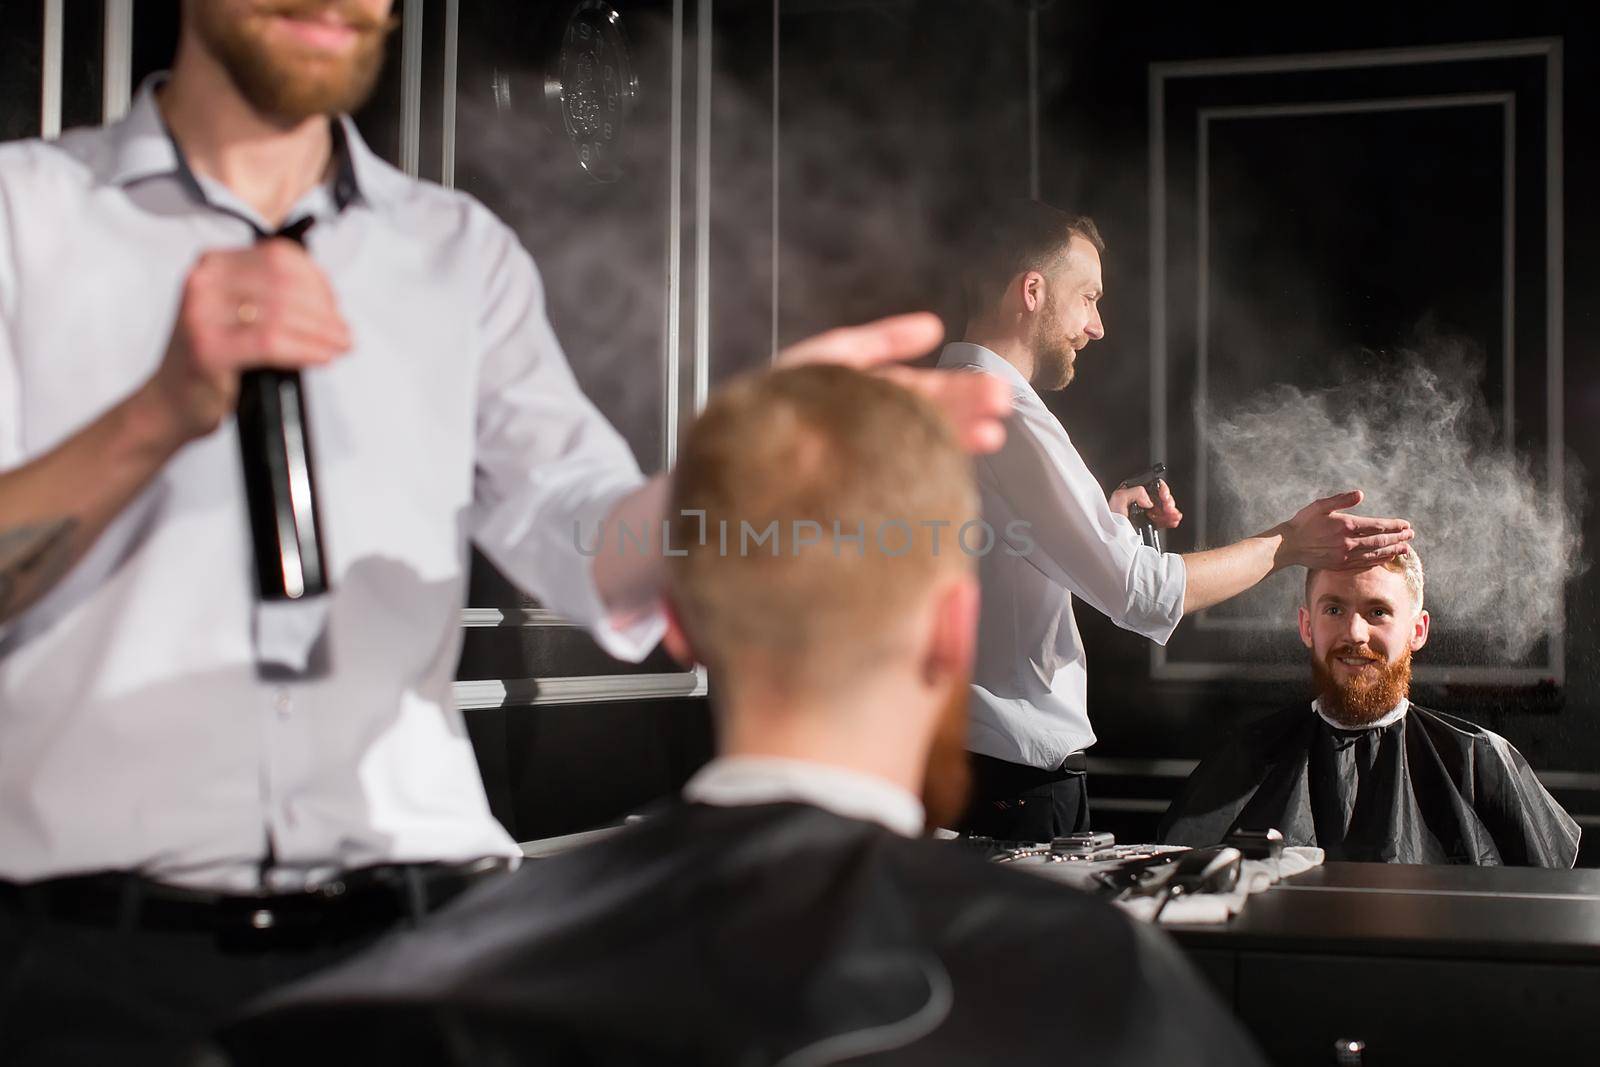 Spraying hair. Portrait of a barber spraying water on the hair of the client. by StudioPeace